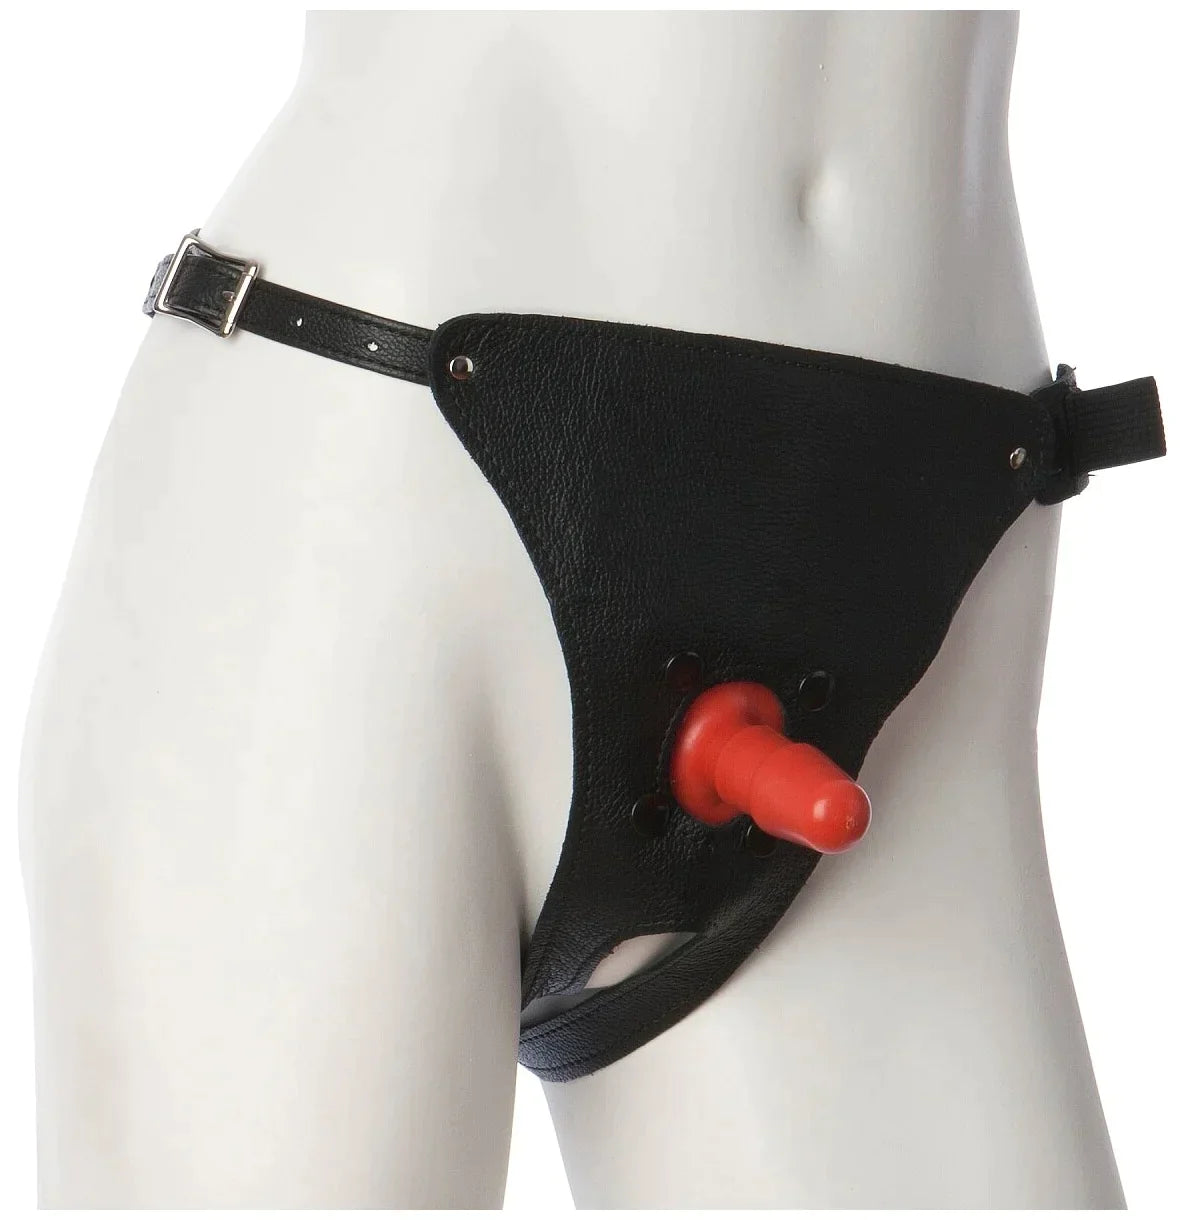 Doc Johnson Leather Ultra Harness with Plug - Red - 1010-06-BX - up to 49 " waist